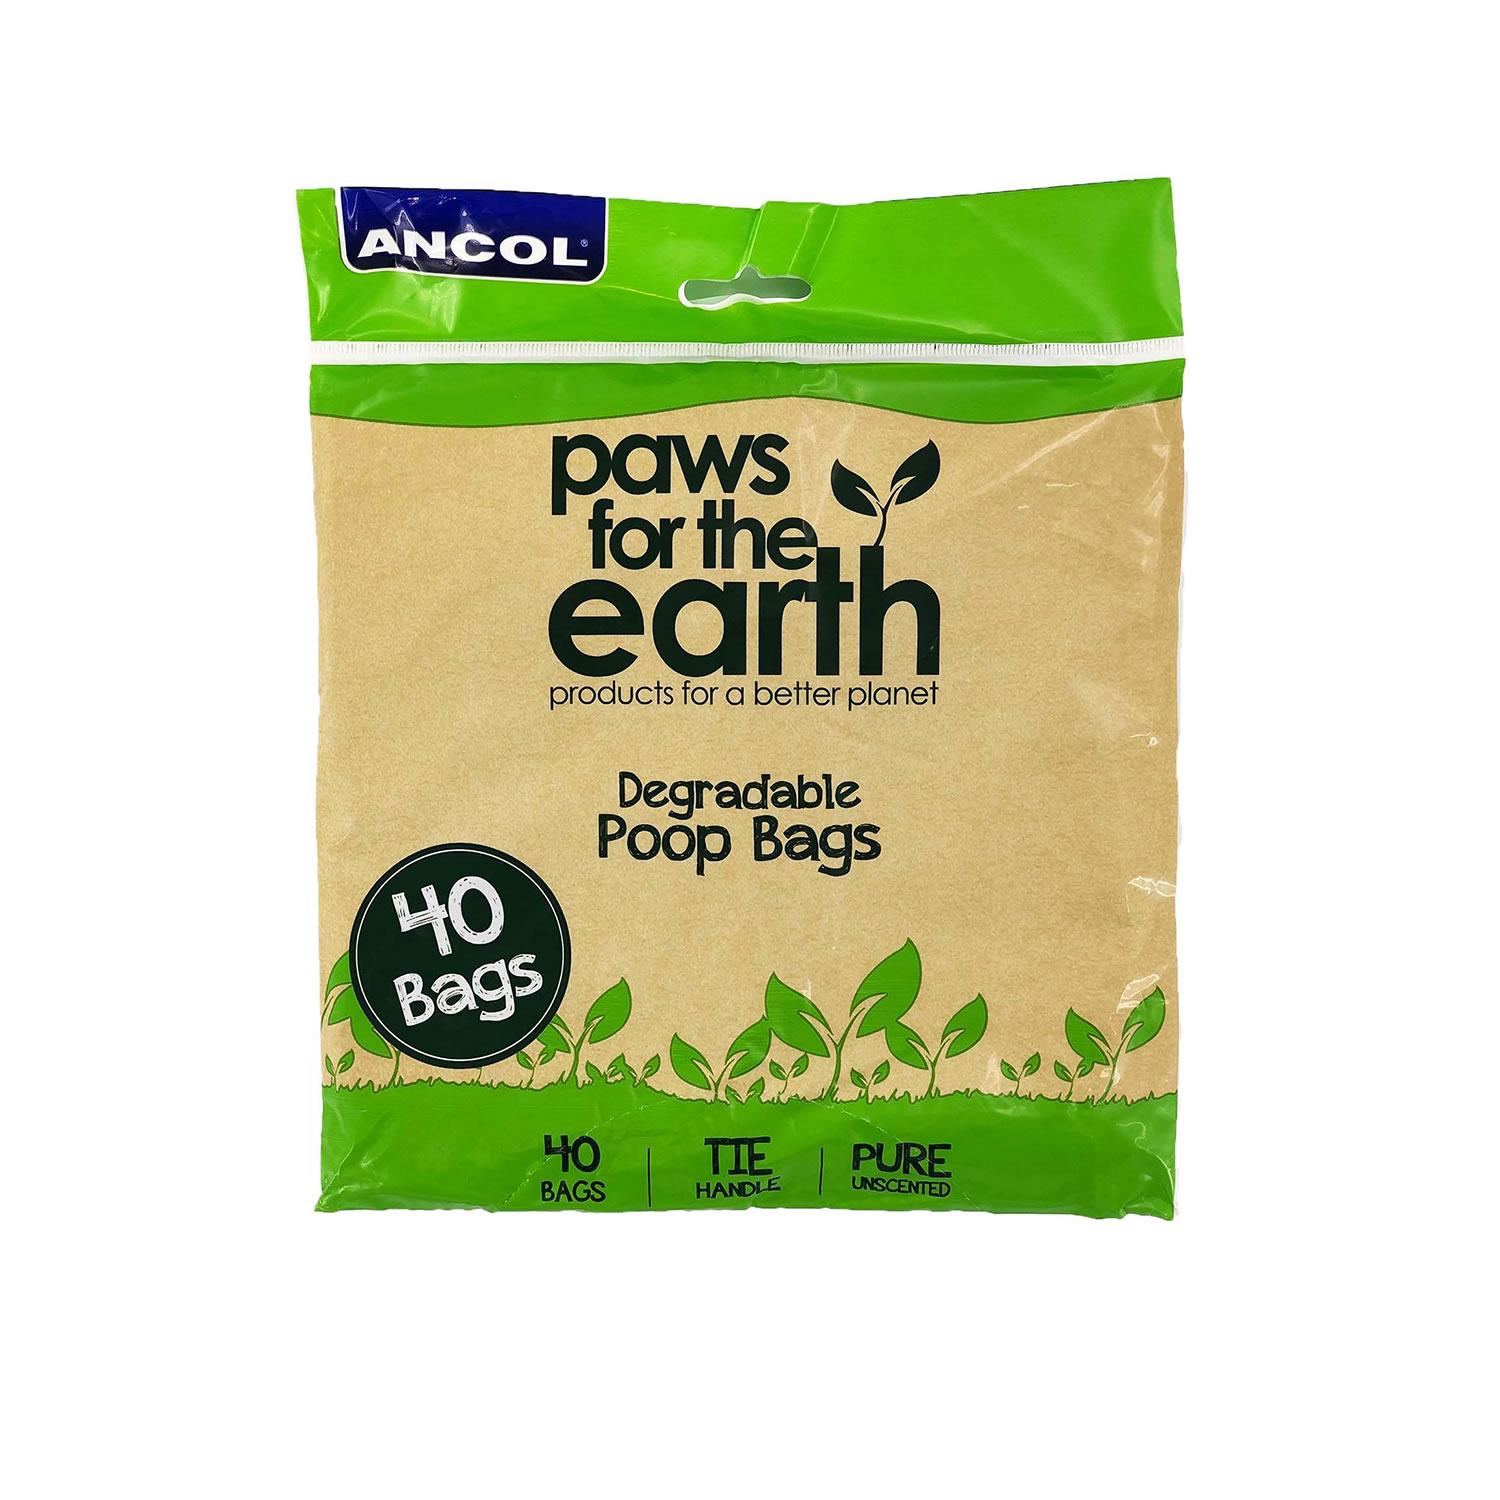 ANCOL PAWS FOR THE EARTH FLAT PACK POOP BAG ANCOL PAWS FOR THE EARTH FLAT PACK POOP BAG 40 BAGS  40 BAGS